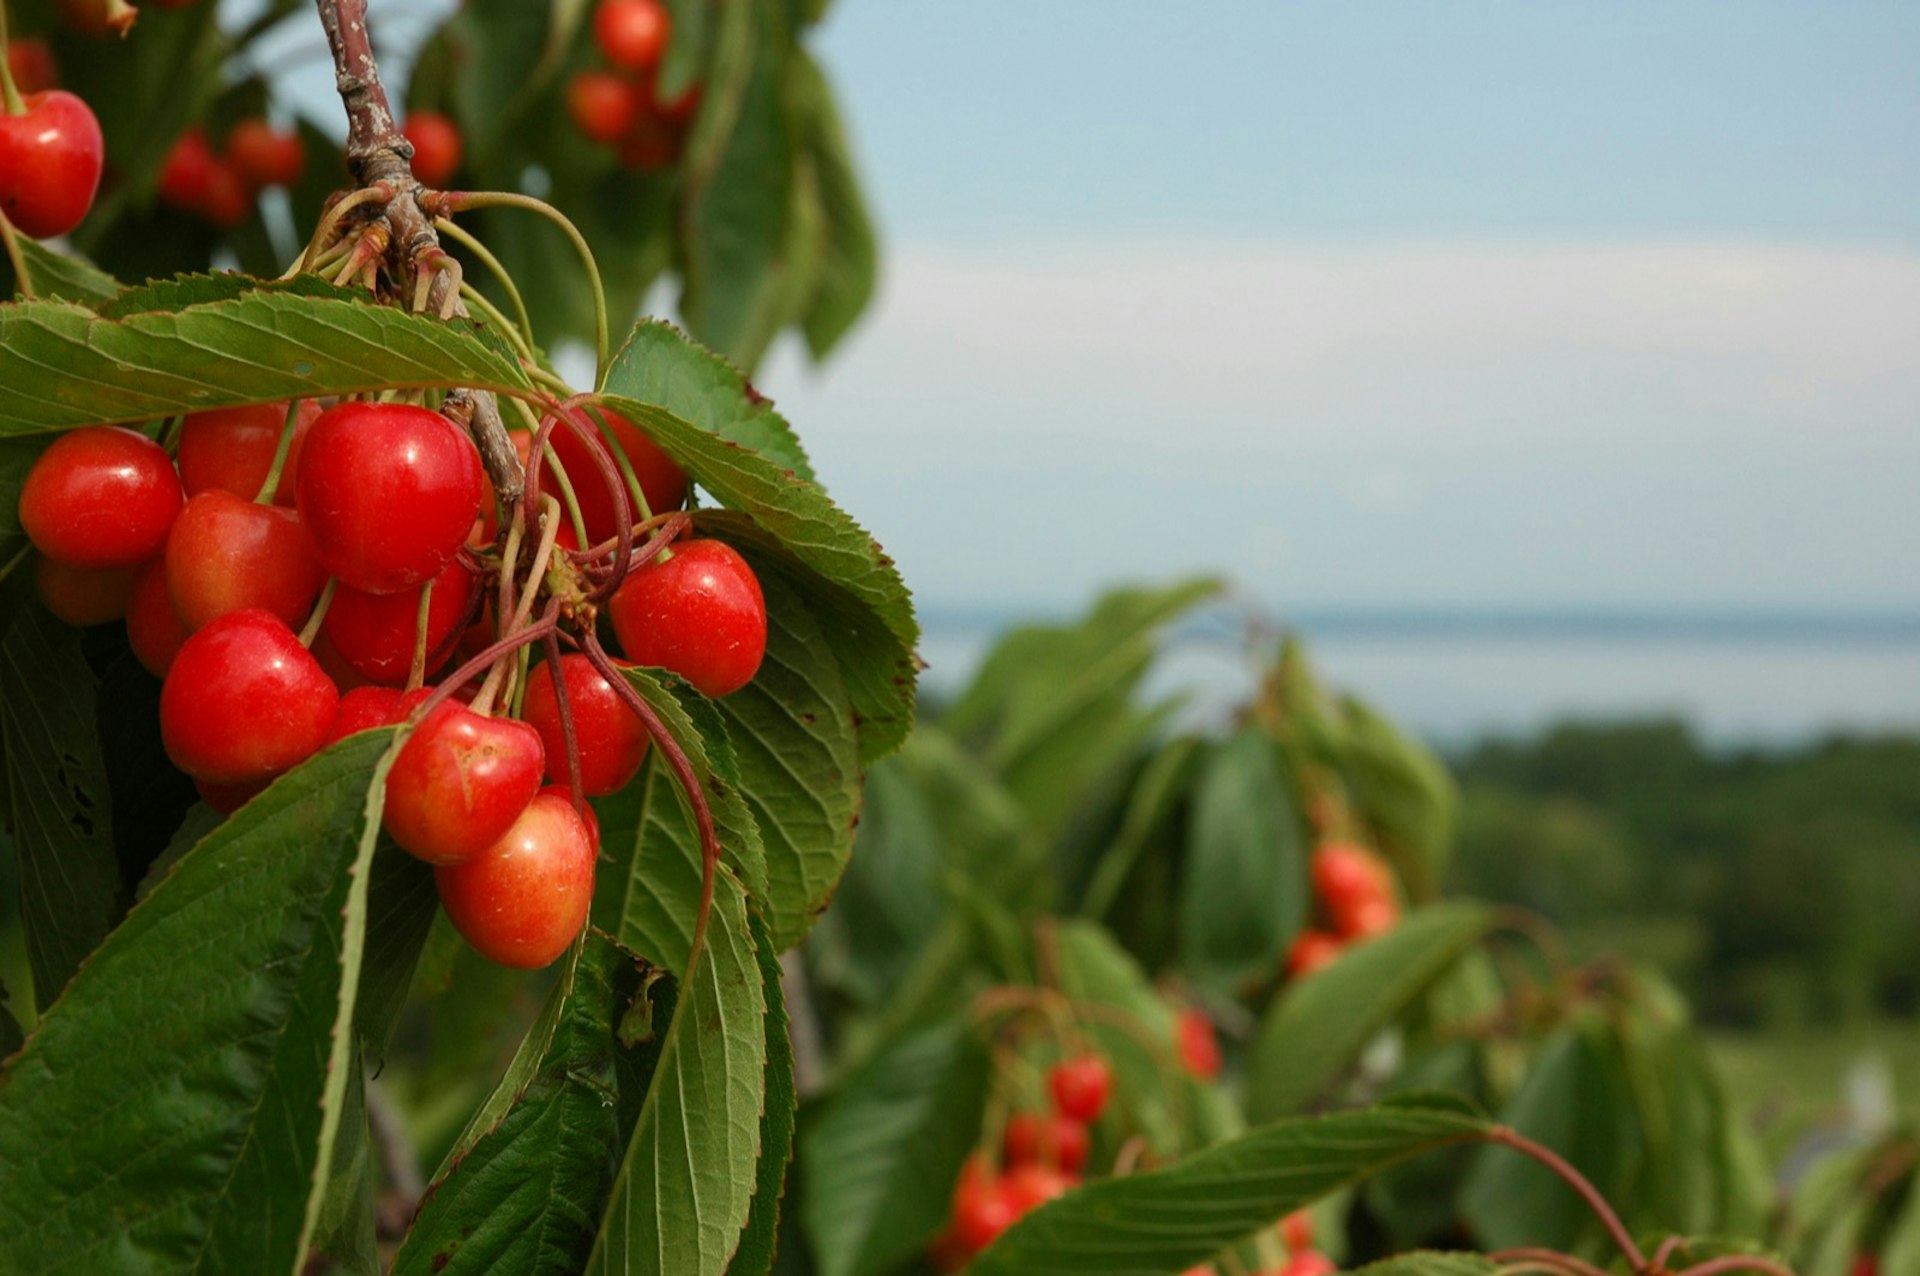 A close up shot of bright red cherries growing on a tree with a vast lake in the background